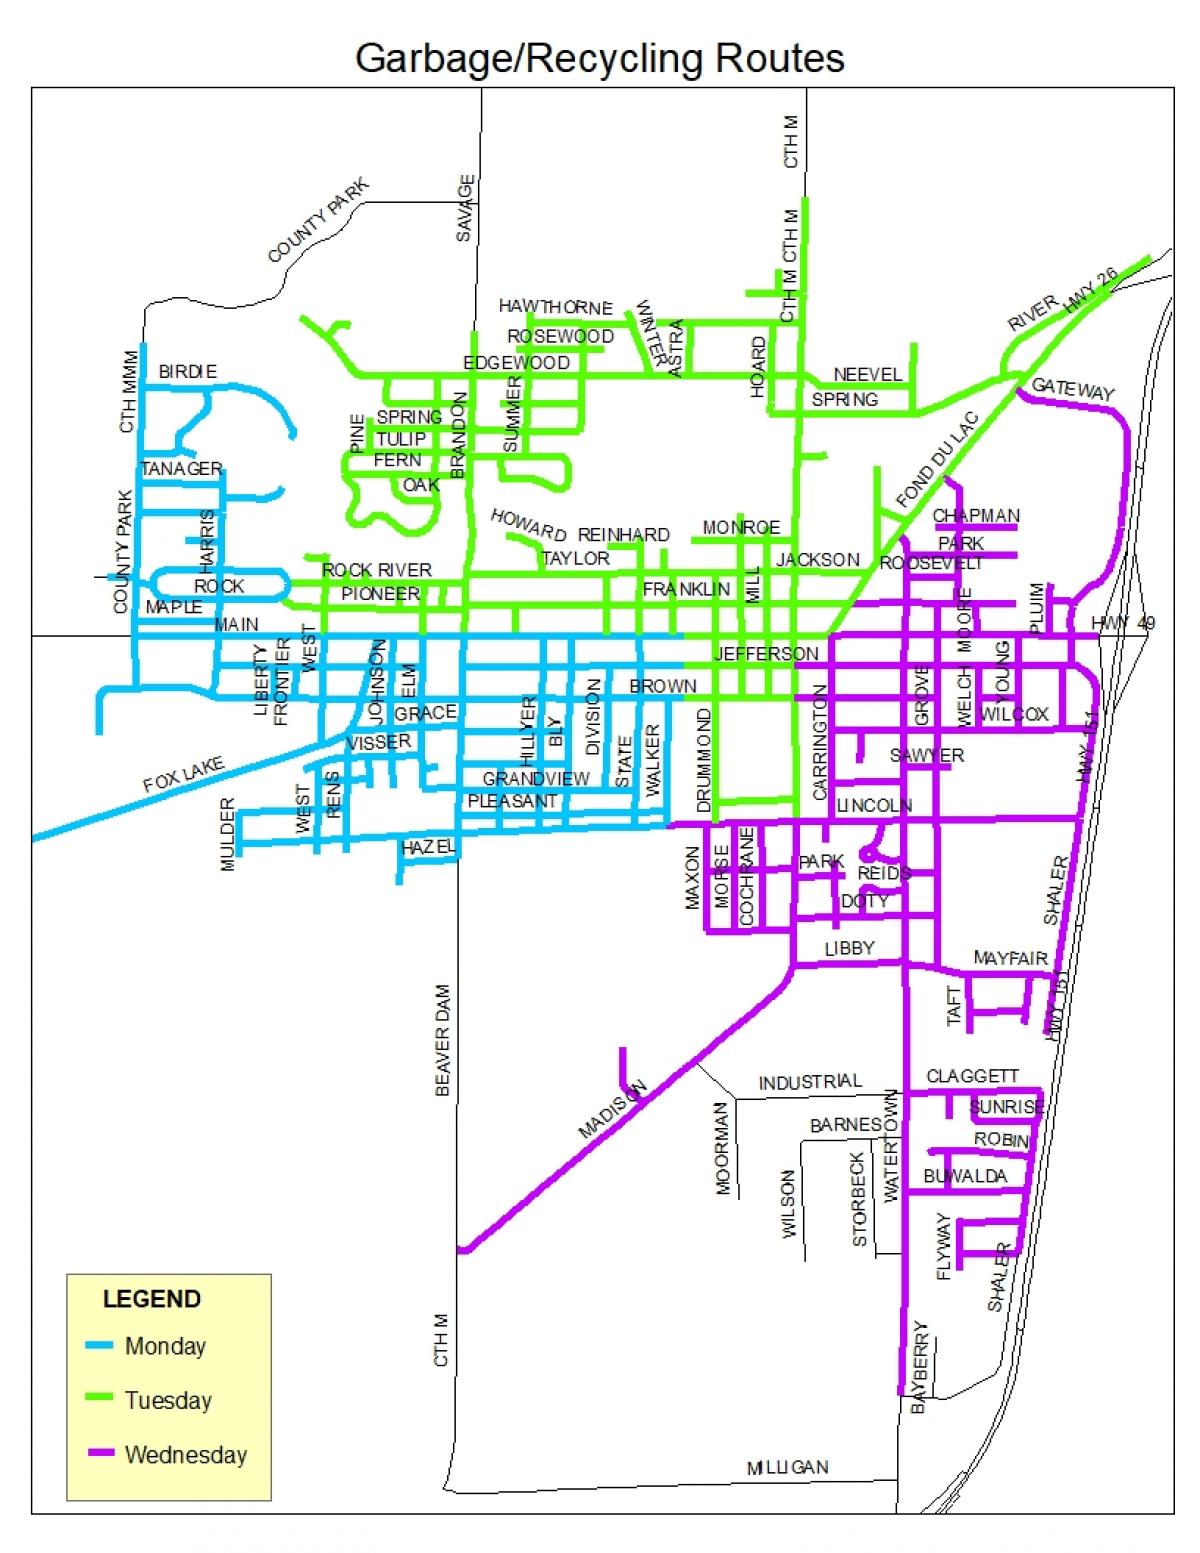 Garbage/Recycling Routes